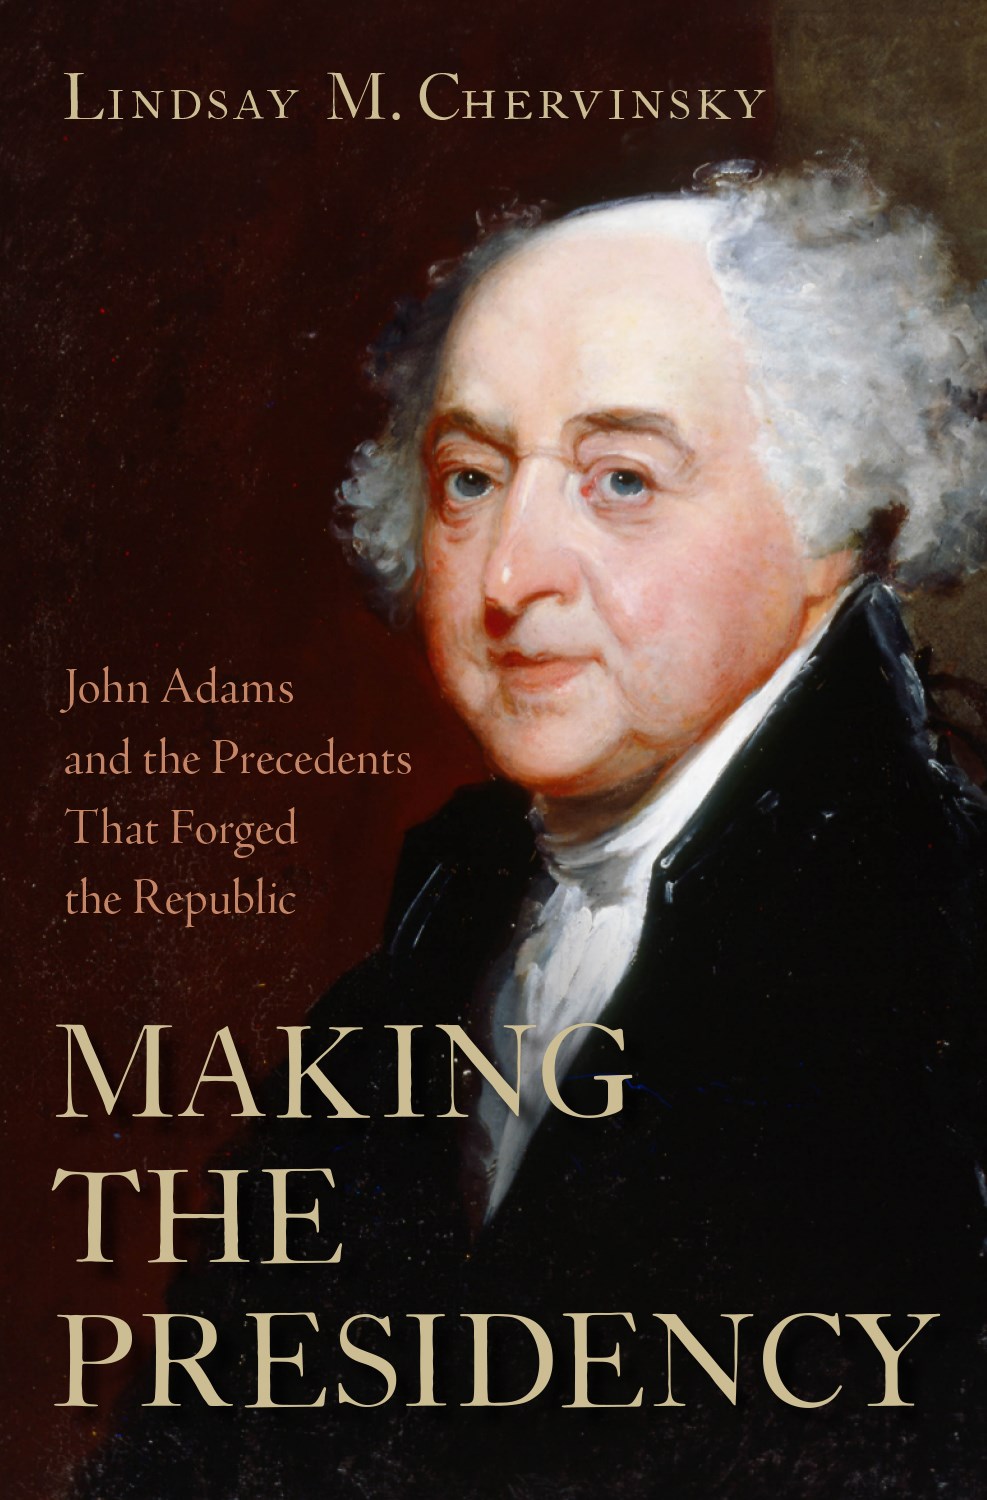 Making the Presidency: John Adams and the Precedents That Forged the Republic